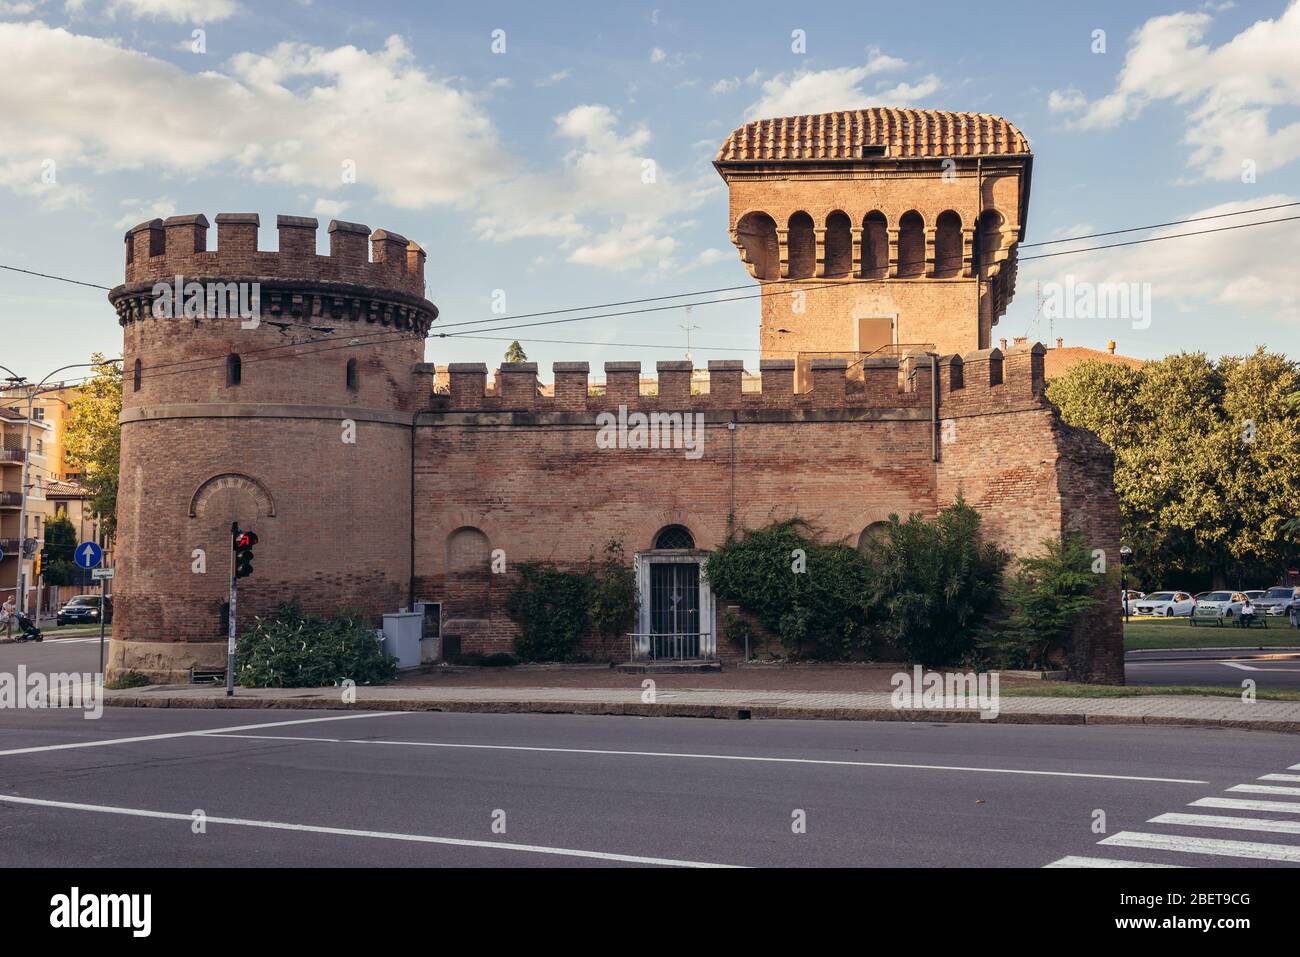 Porta Saragozza, one of the twelve gates of the ancient walls of Bologna, capital and largest city of the Emilia Romagna region in Northern Italy Stock Photo